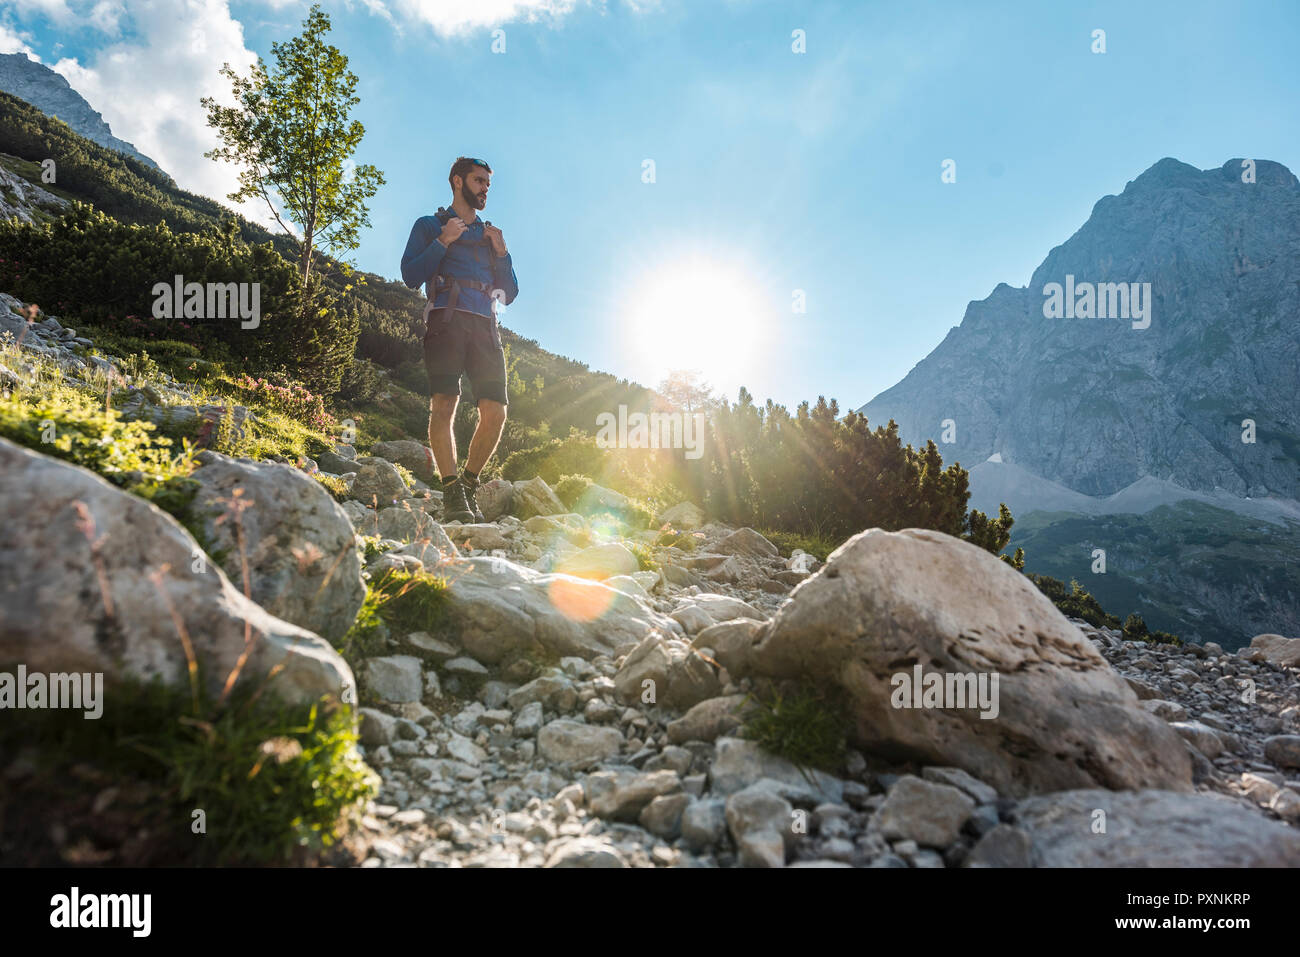 Austria, Tyrol, Young man hiking in the mountains Stock Photo